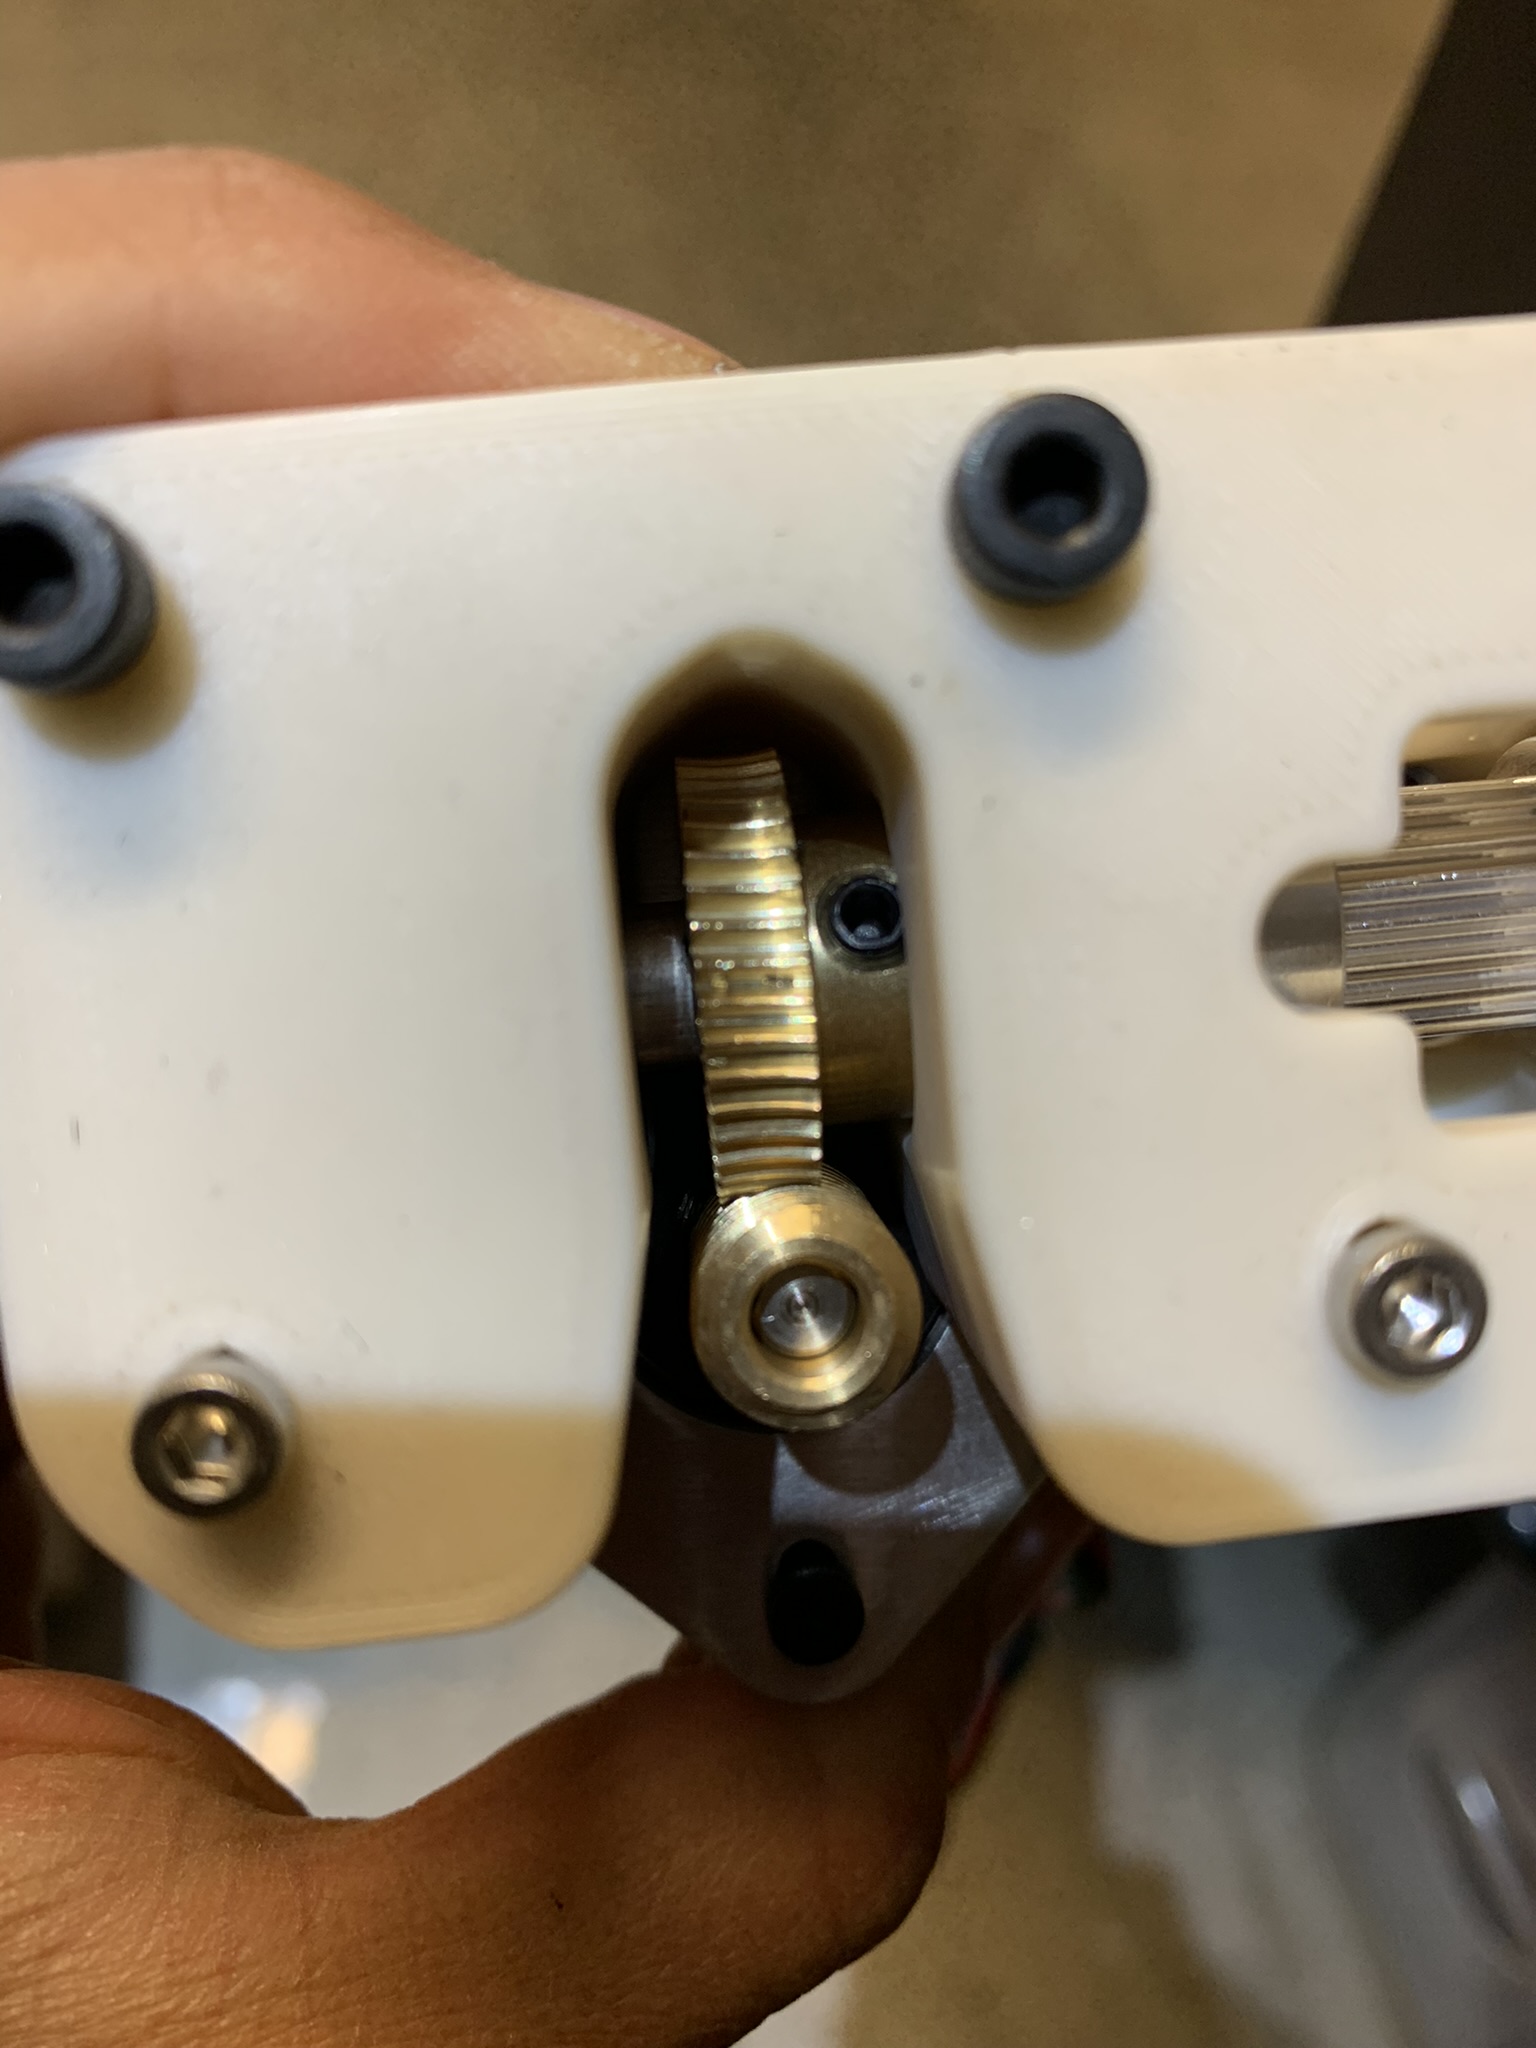 Drive assembly with misaligned spur